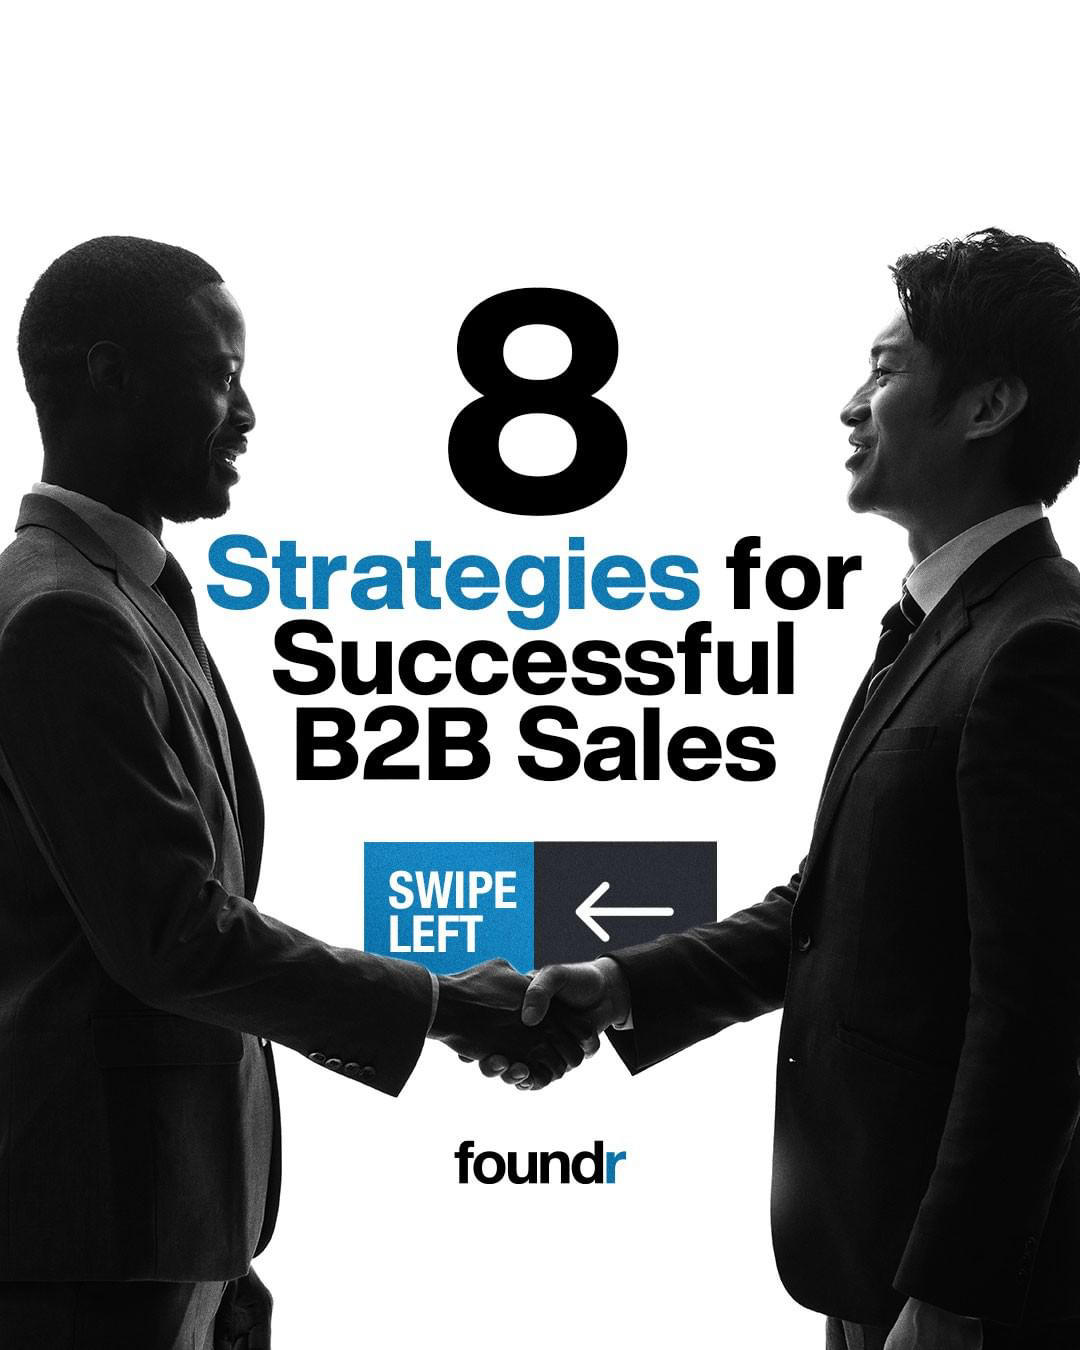 image  1 Foundr - 8 Strategies for Successful B2B SalesWe’re excited to share that our new “Find Your Dream C